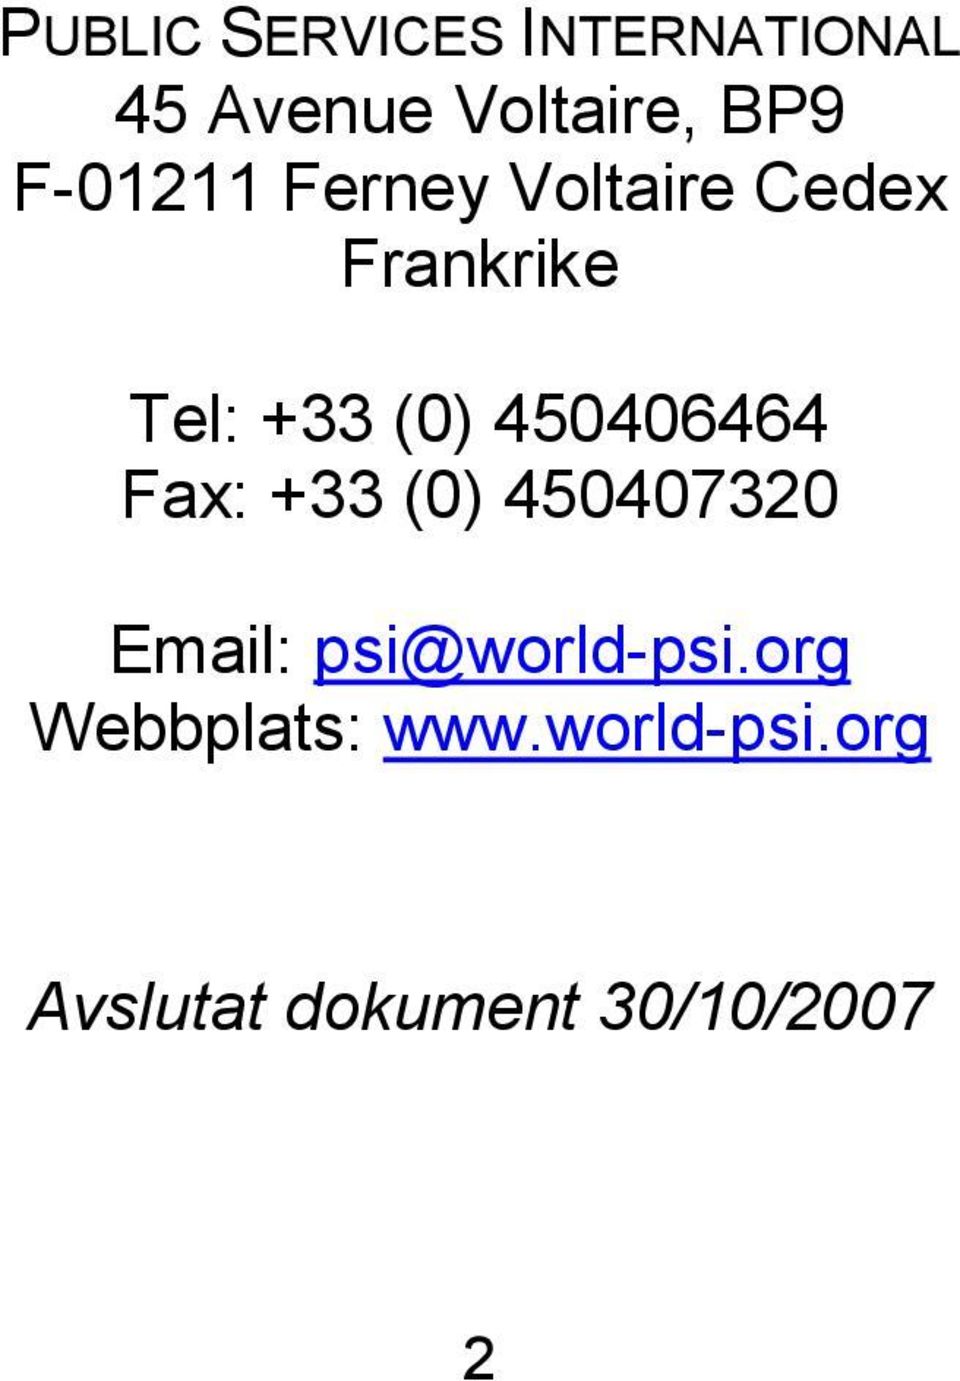 450406464 Fax: +33 (0) 450407320 Email: psi@world-psi.